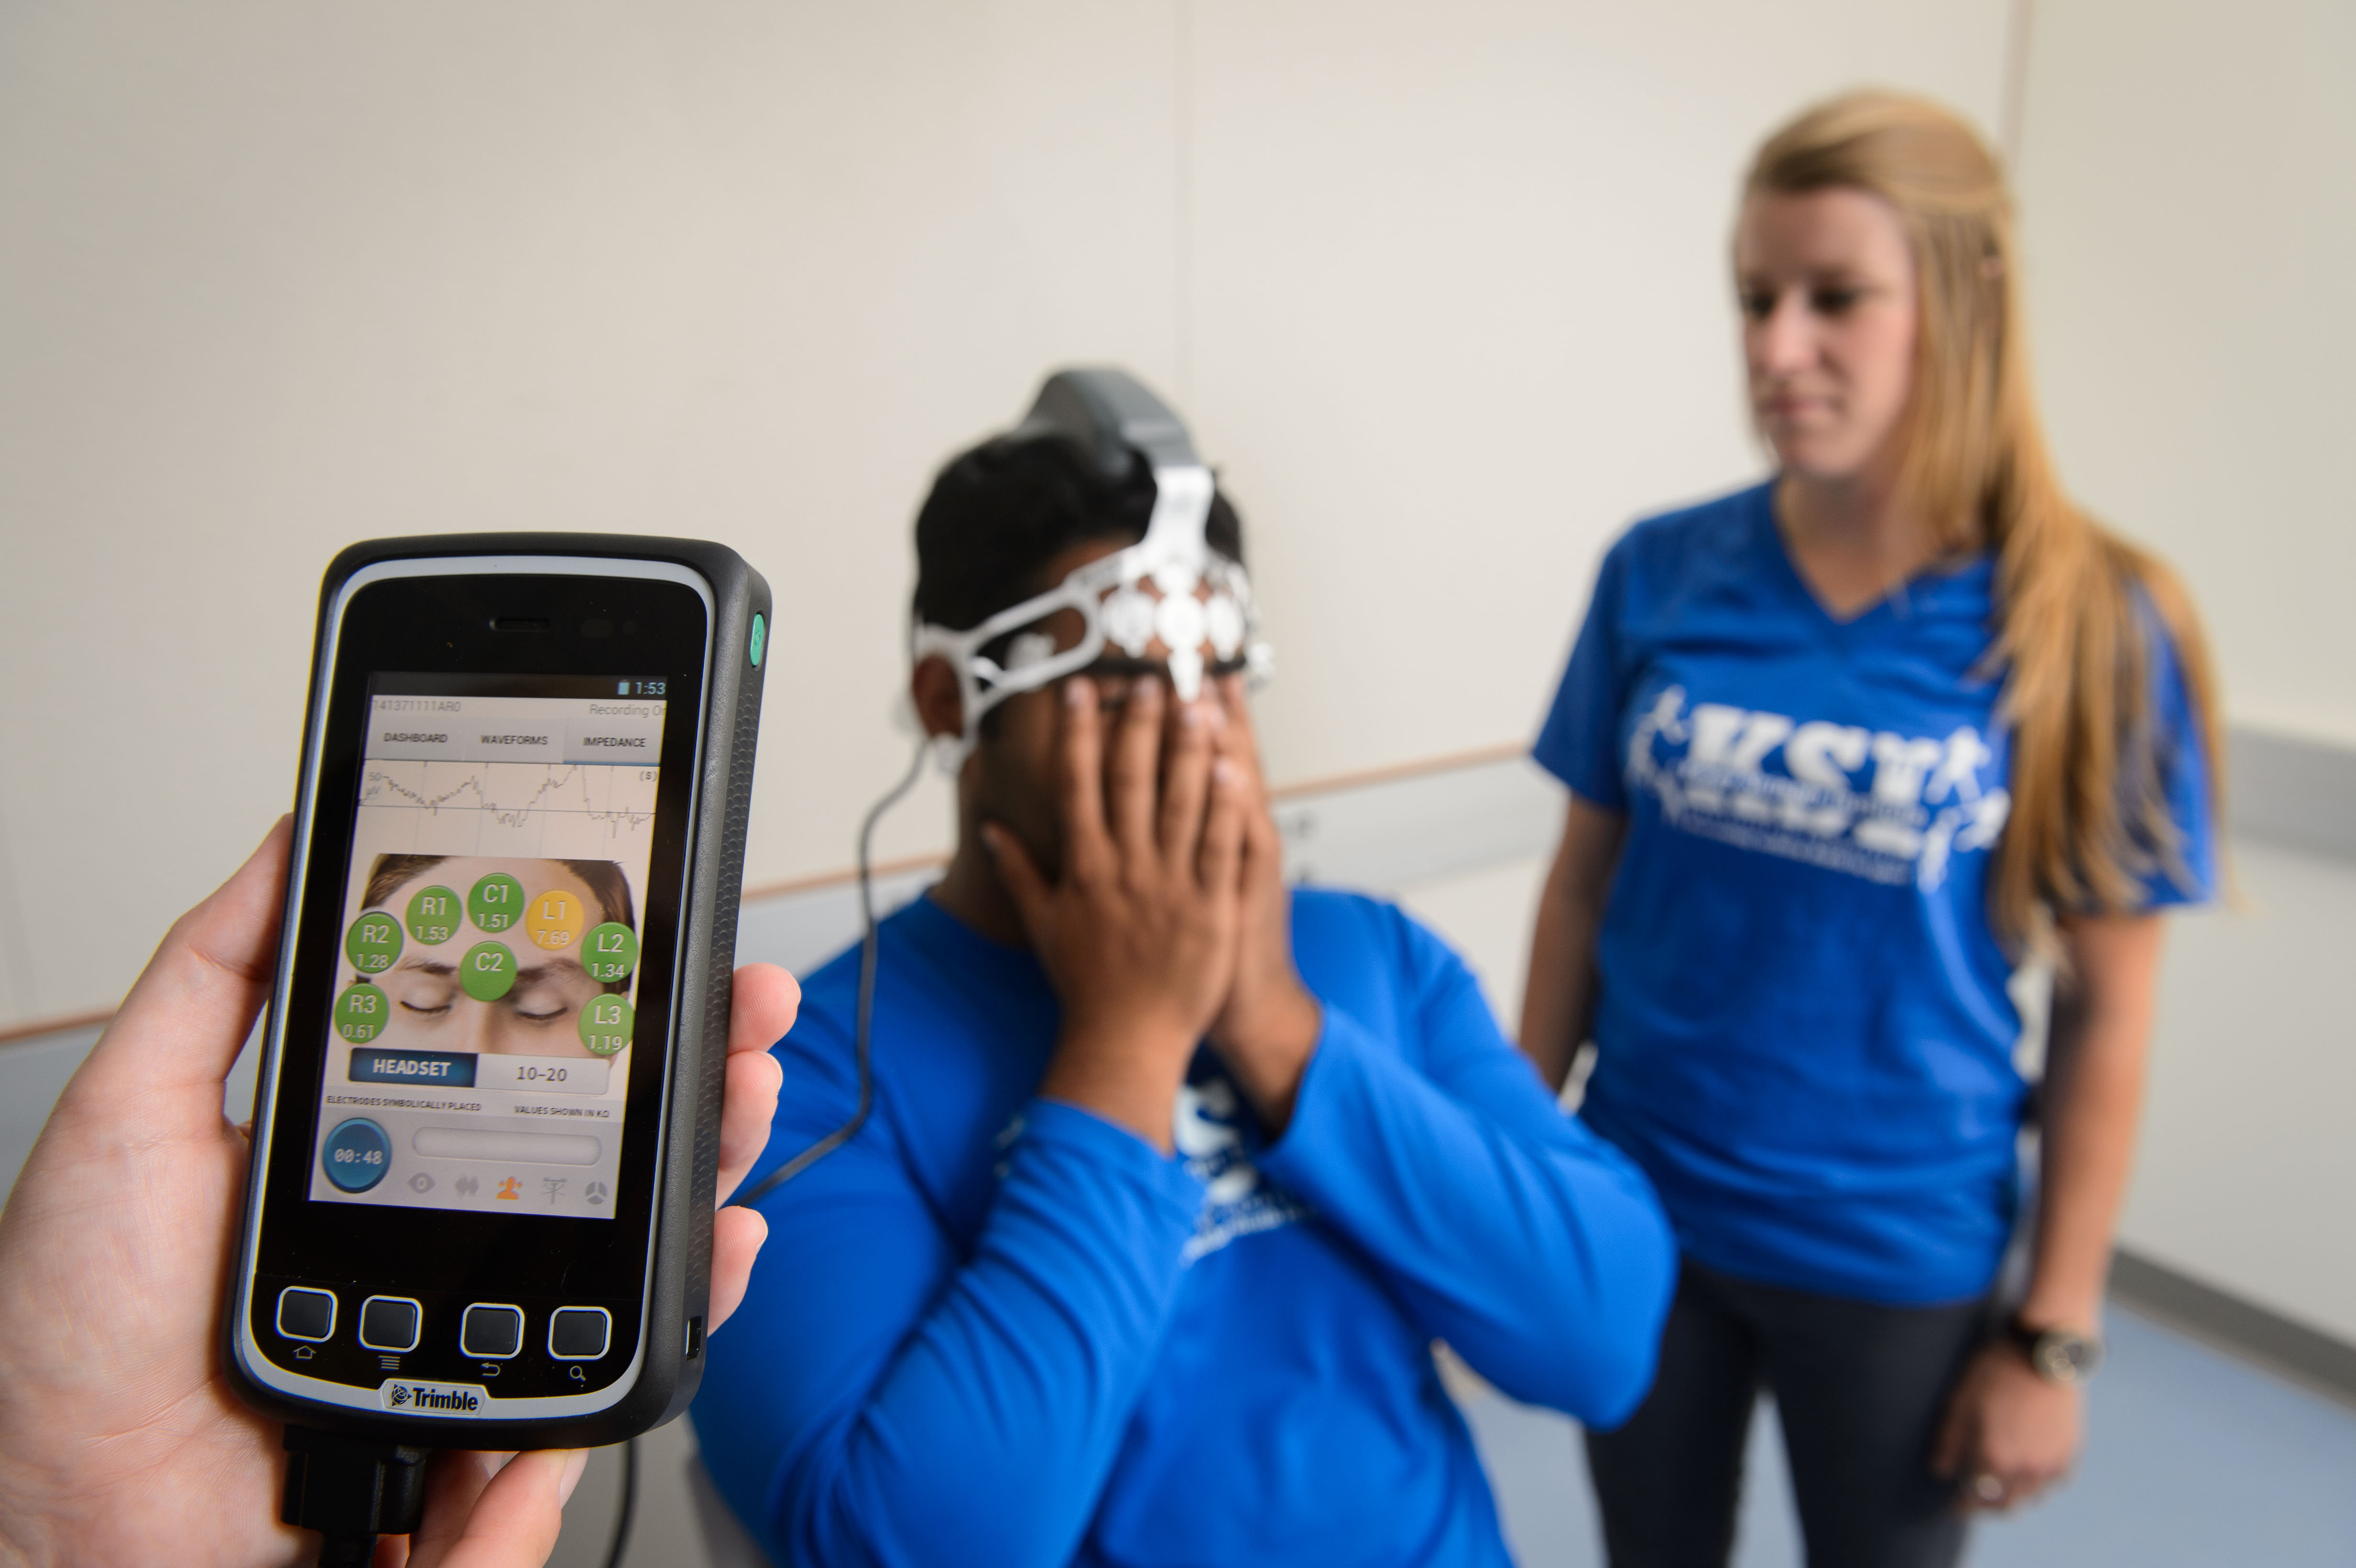 A device to evaluate concussions is demonstrated by Rohin Thomas '17 (CAHNR), left, and Sarah Attanasio '16 (CAHNR). (Peter Morenus/UConn Photo)